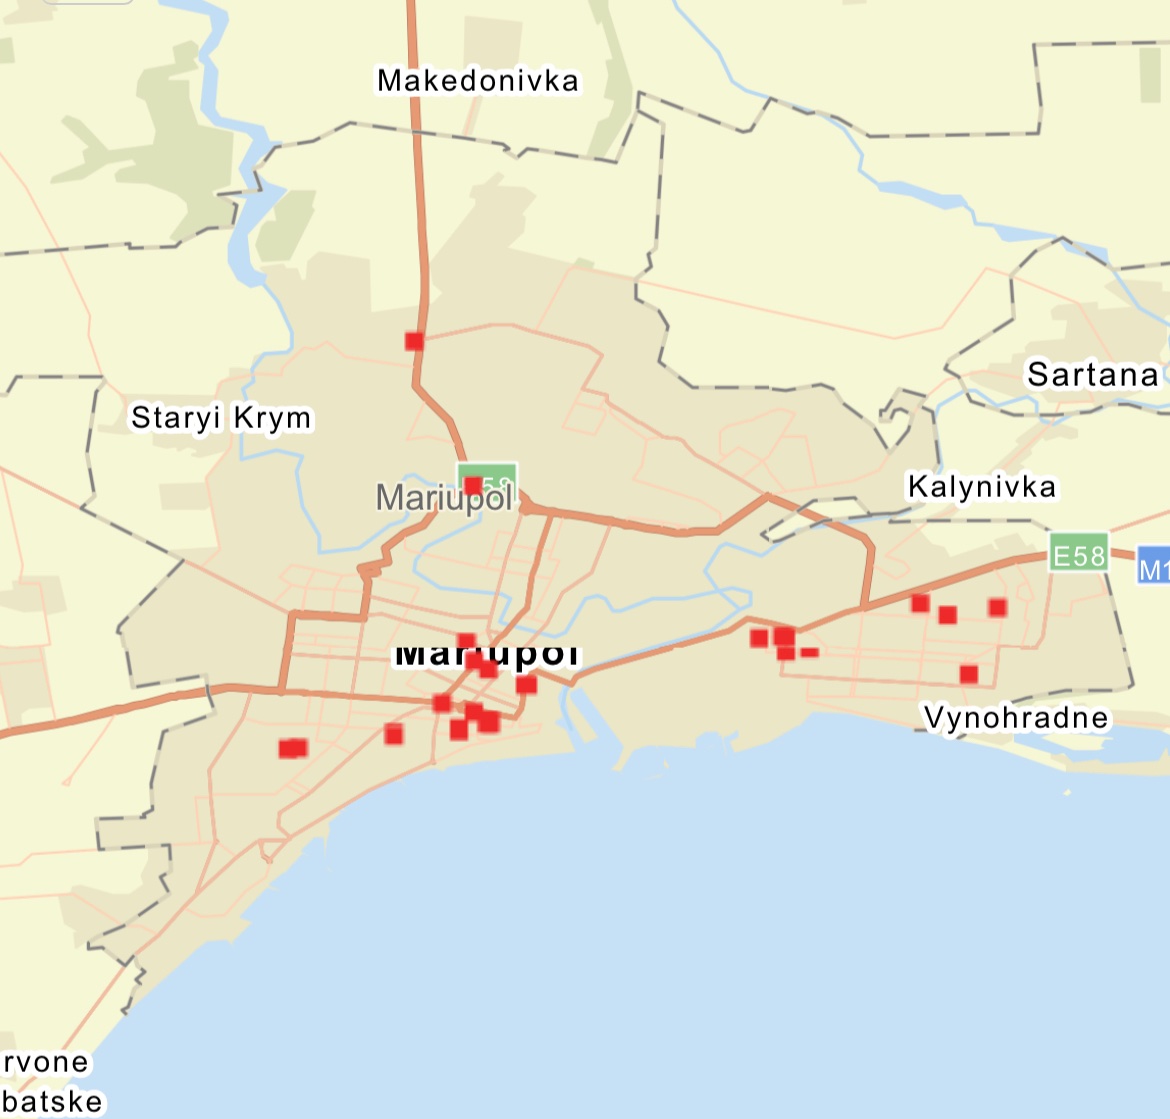 Fires detected by NASA's FIRMS in the last 24 hours near Kyiv, Chernihiv, and Mariupol